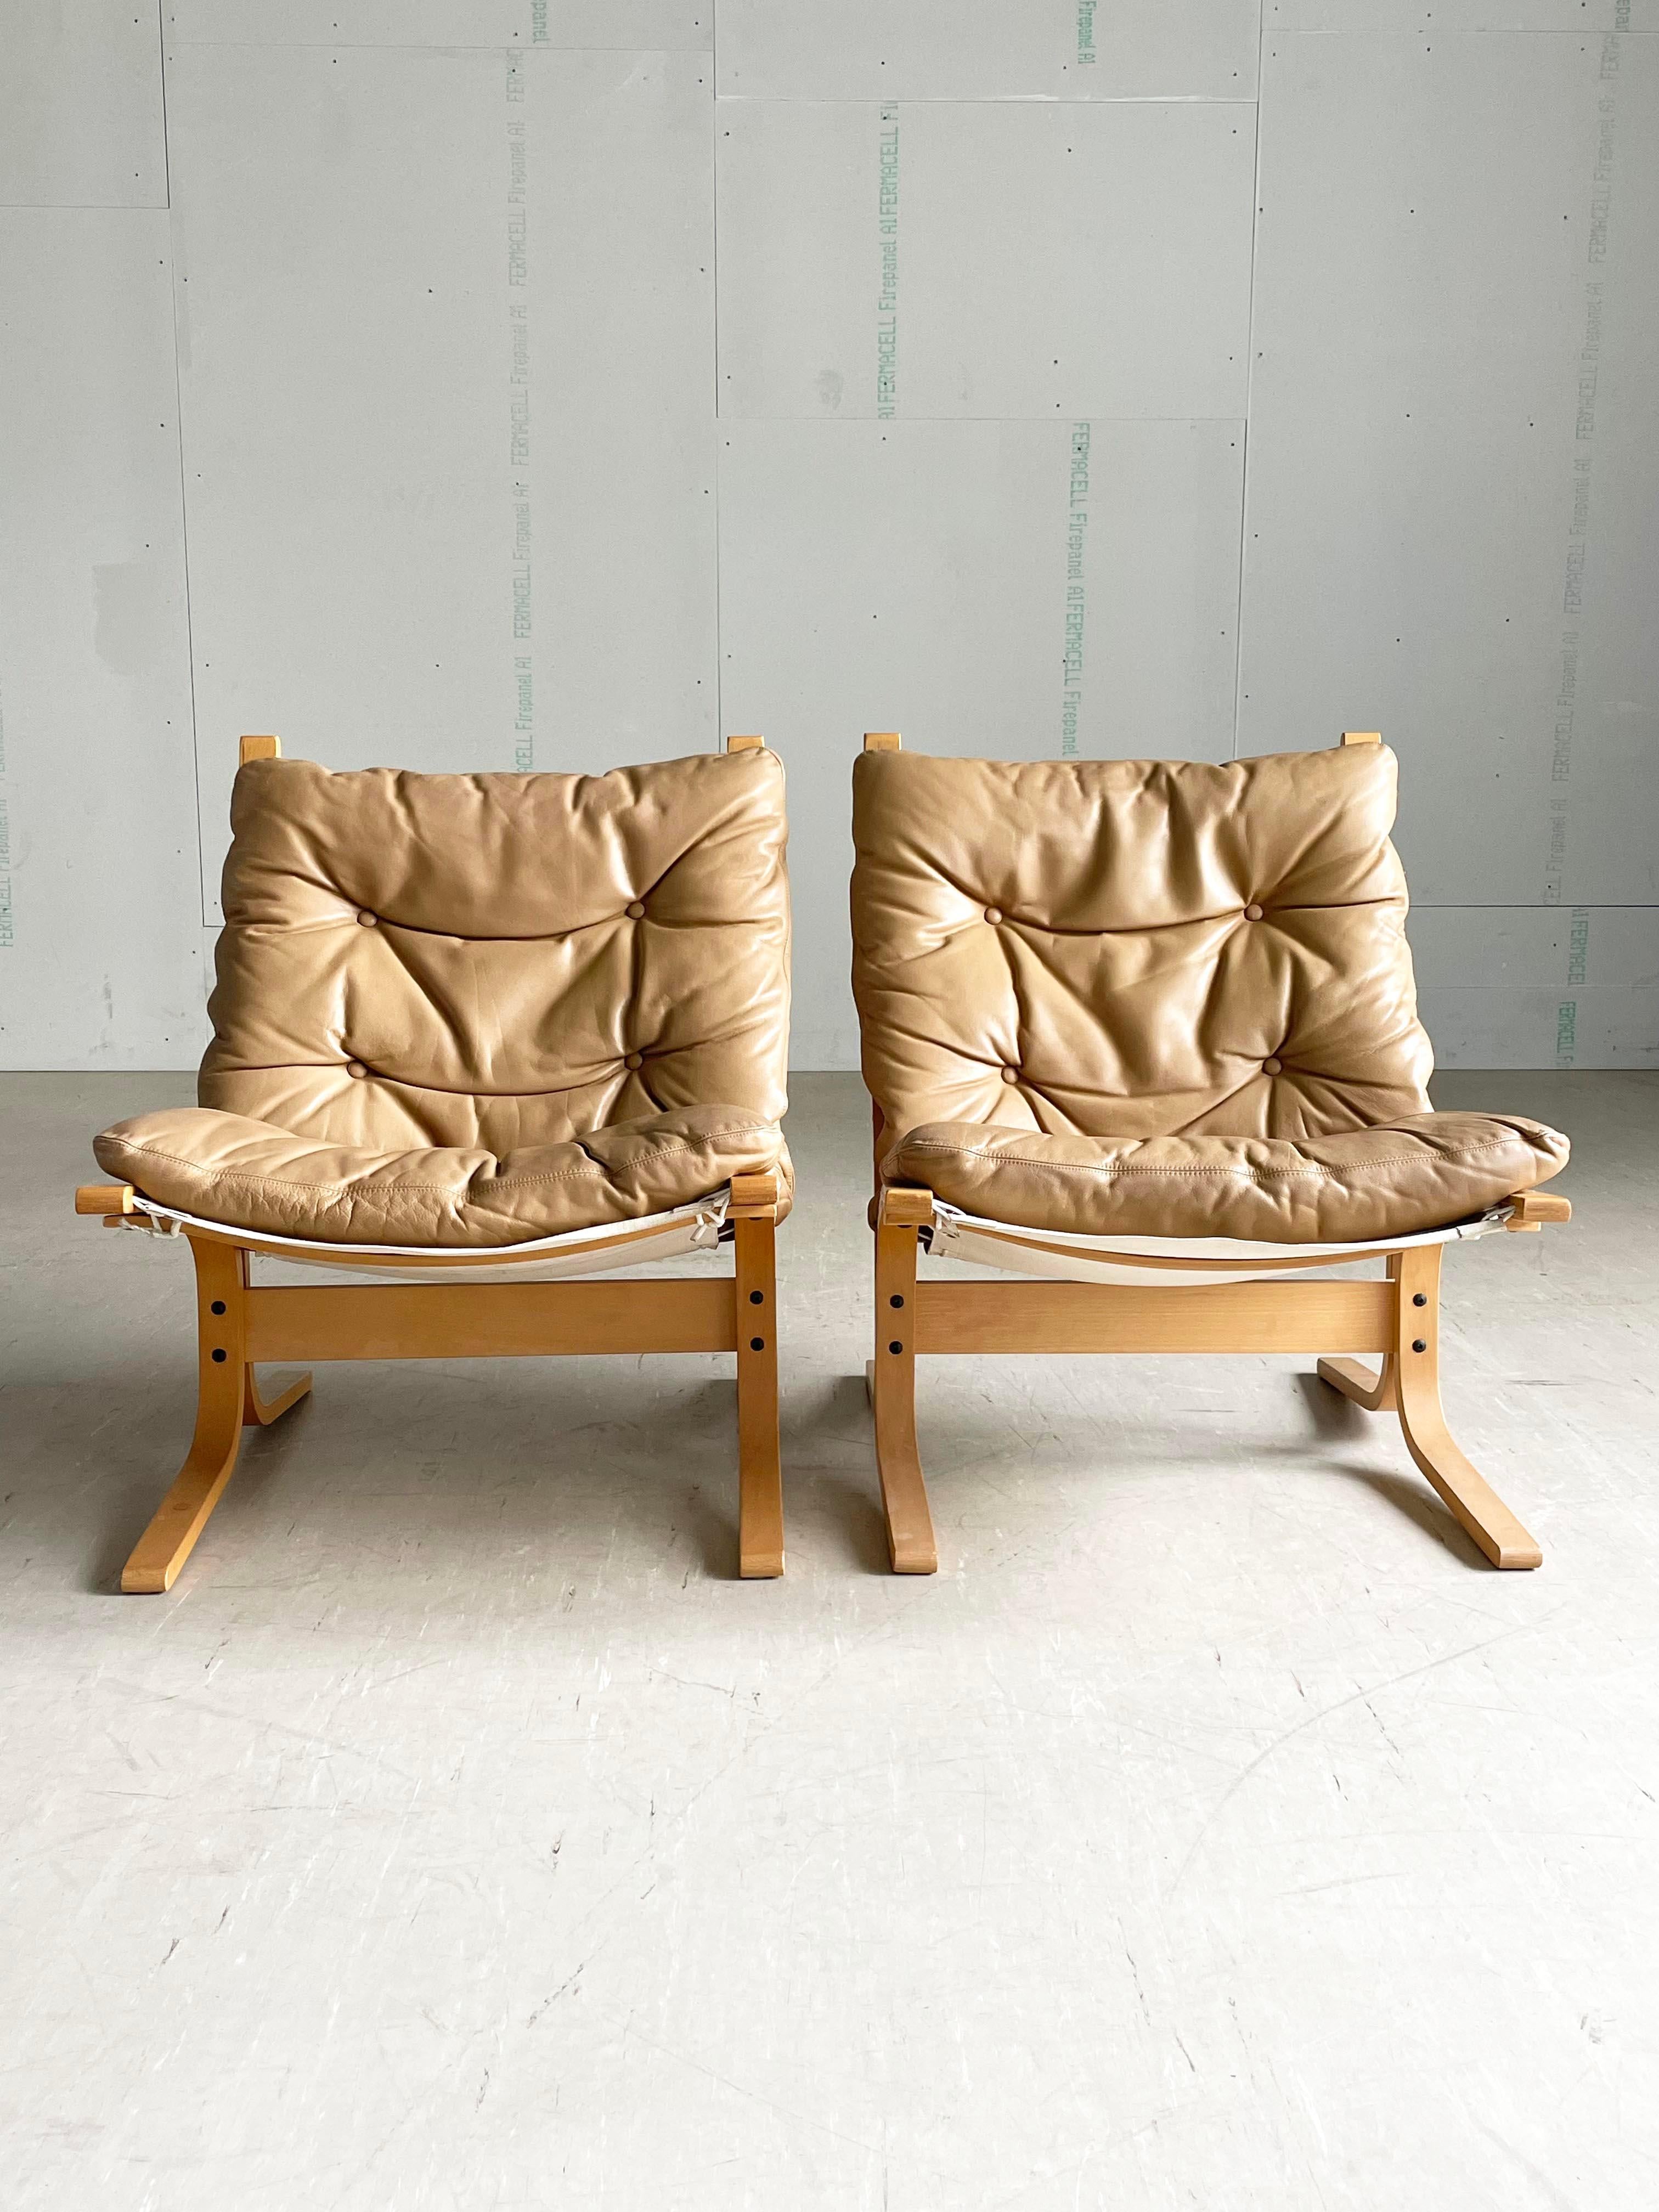 Pair of Westnova Ingmar Relling 'Siesta' Lounge Chairs Two identical chairs with low back bent plywood bases with sling leather seat pads. 
Designed by Ingmar Relling, 1965. Produced by Westnova, Norway. 1980's productions in good condition with